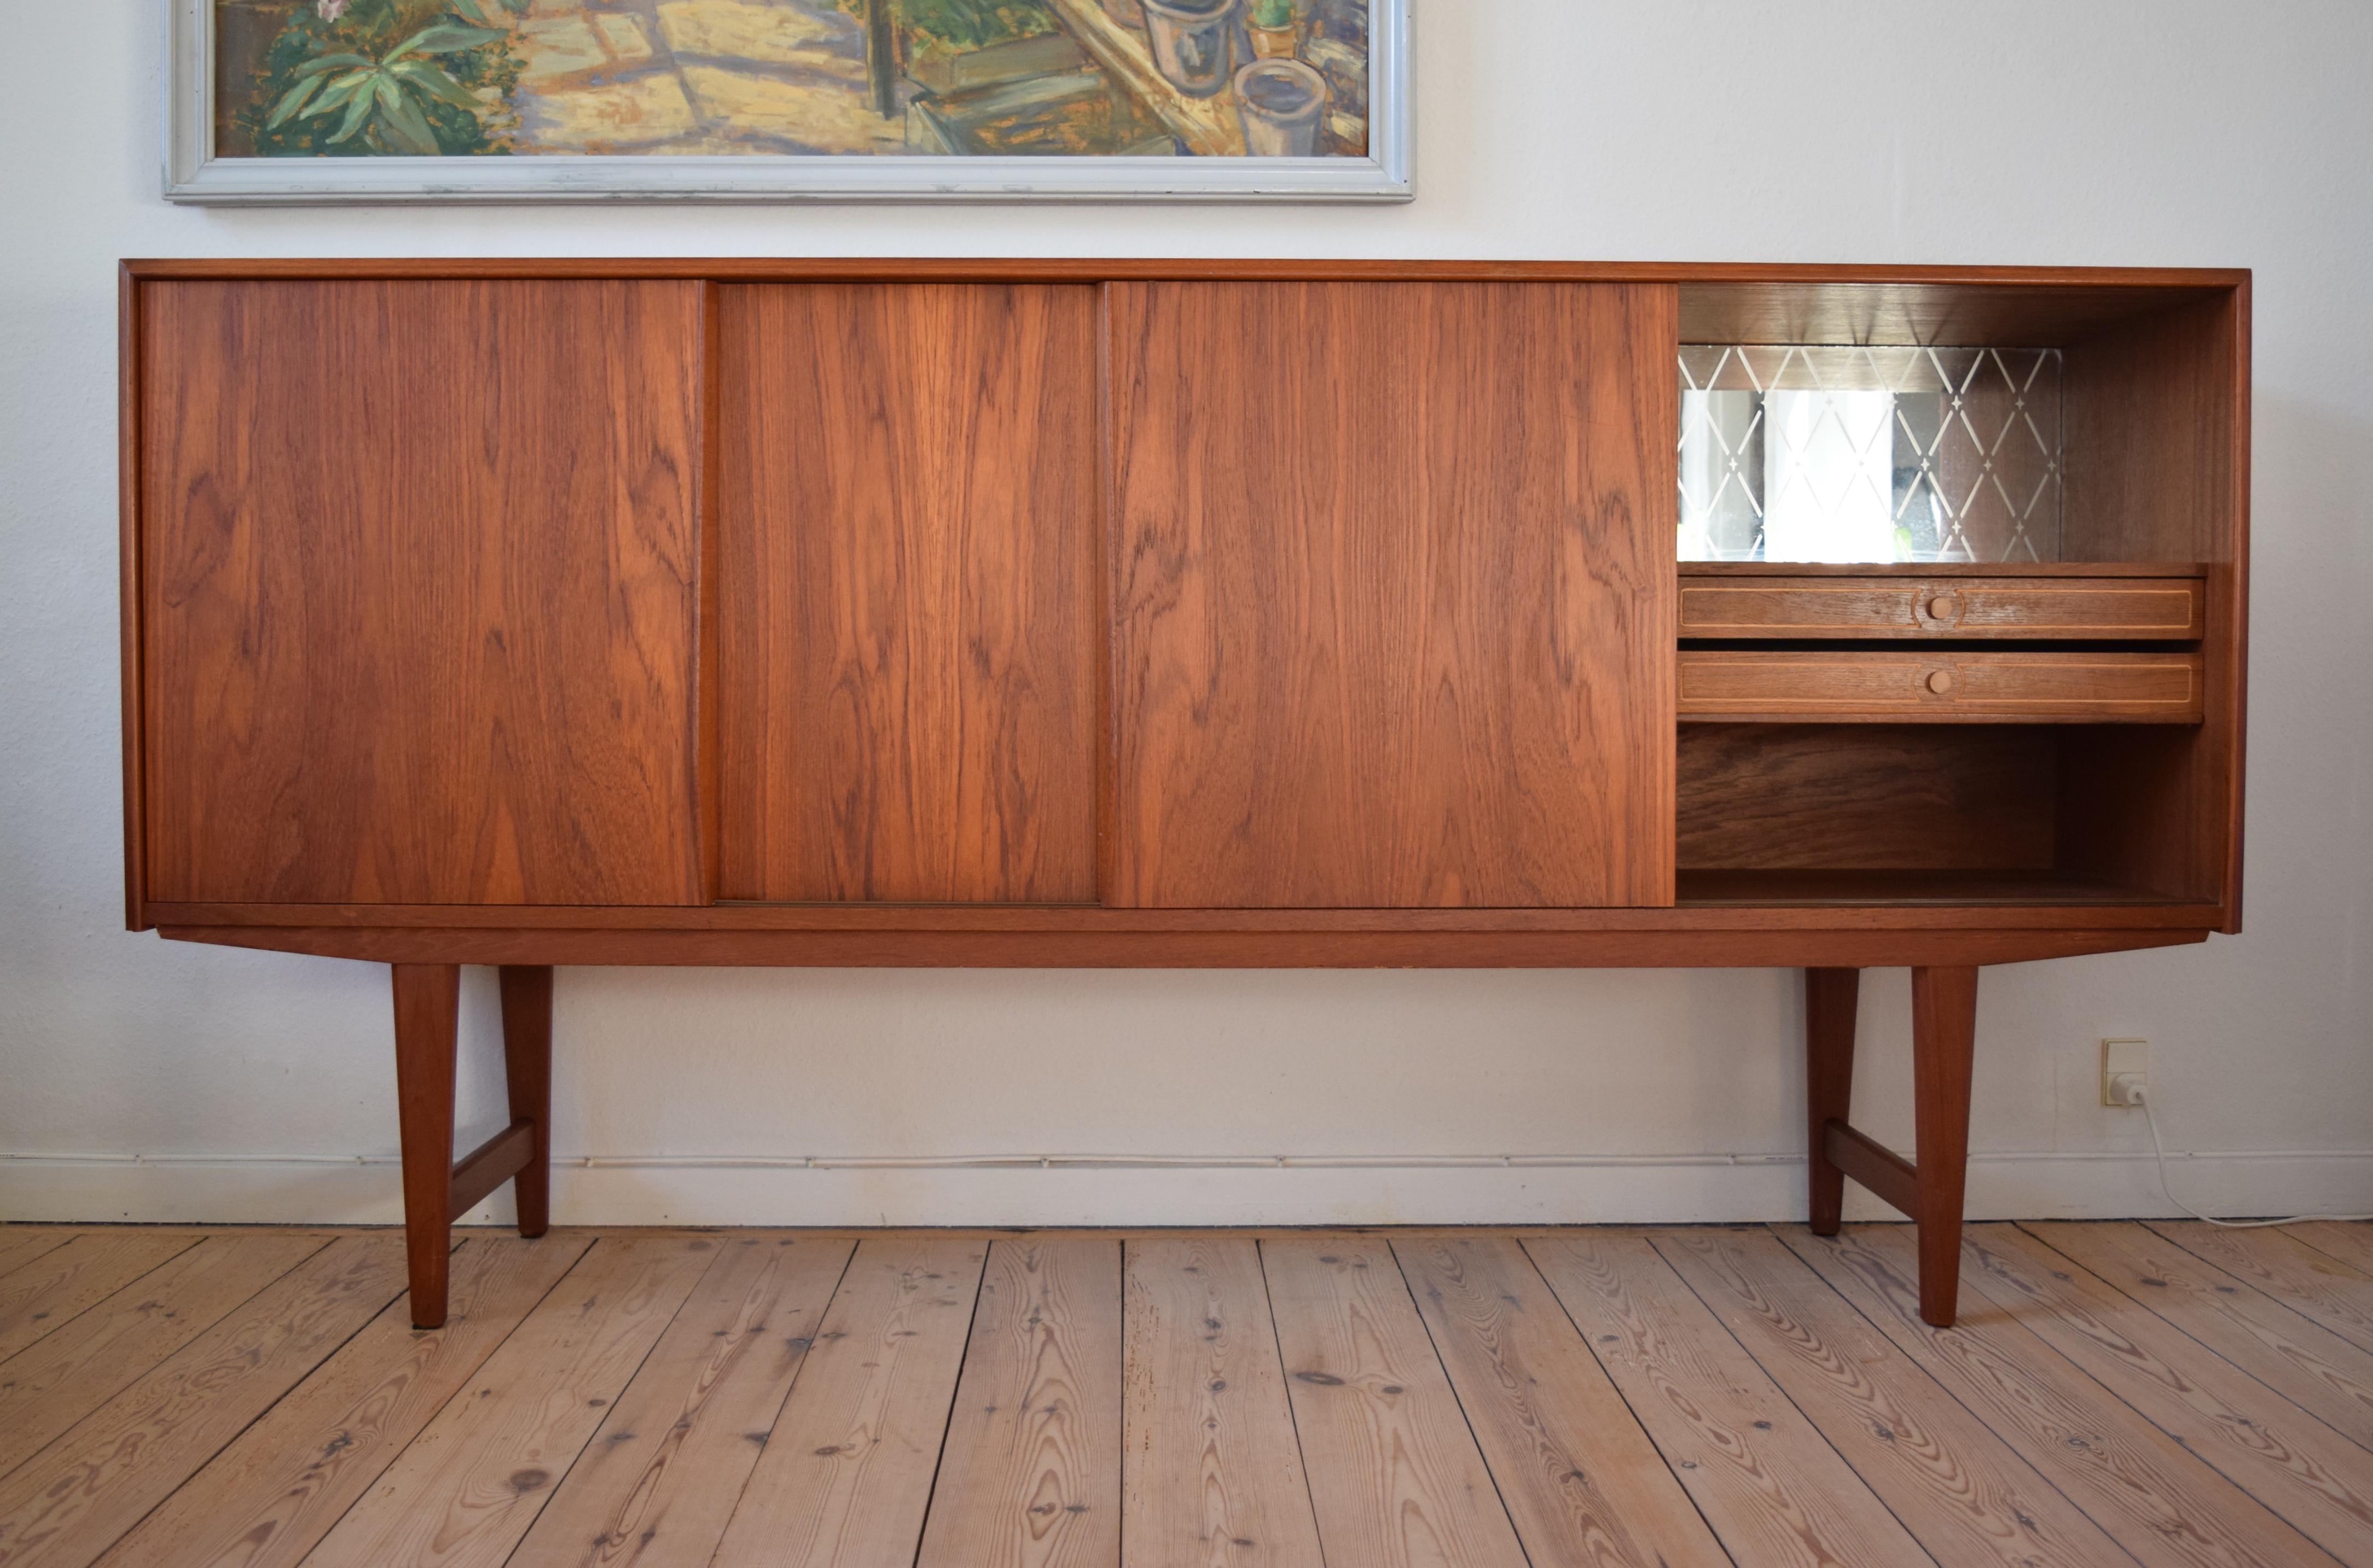 Low teak sideboard deigned by E.W. Bach manufactured in Denmark in the 1960s. Four smooth sliding doors on the front with three internal compartments with shelves. A small ducting channel has been covered over in the centre compartment, though this